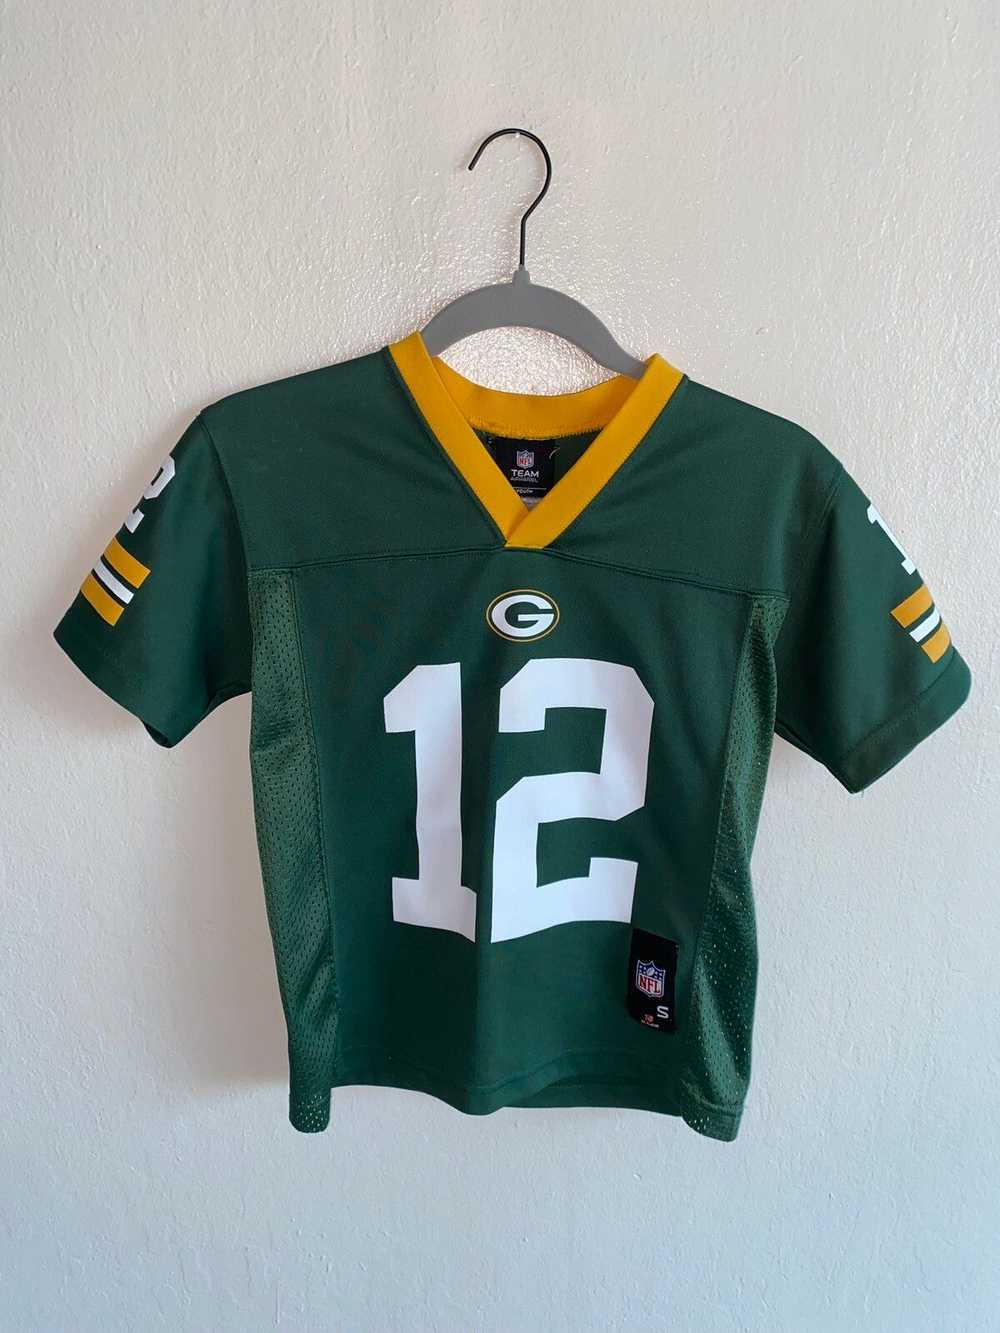 NFL Green Bay Packers Aaron Rodgers Jersey - Yout… - image 1